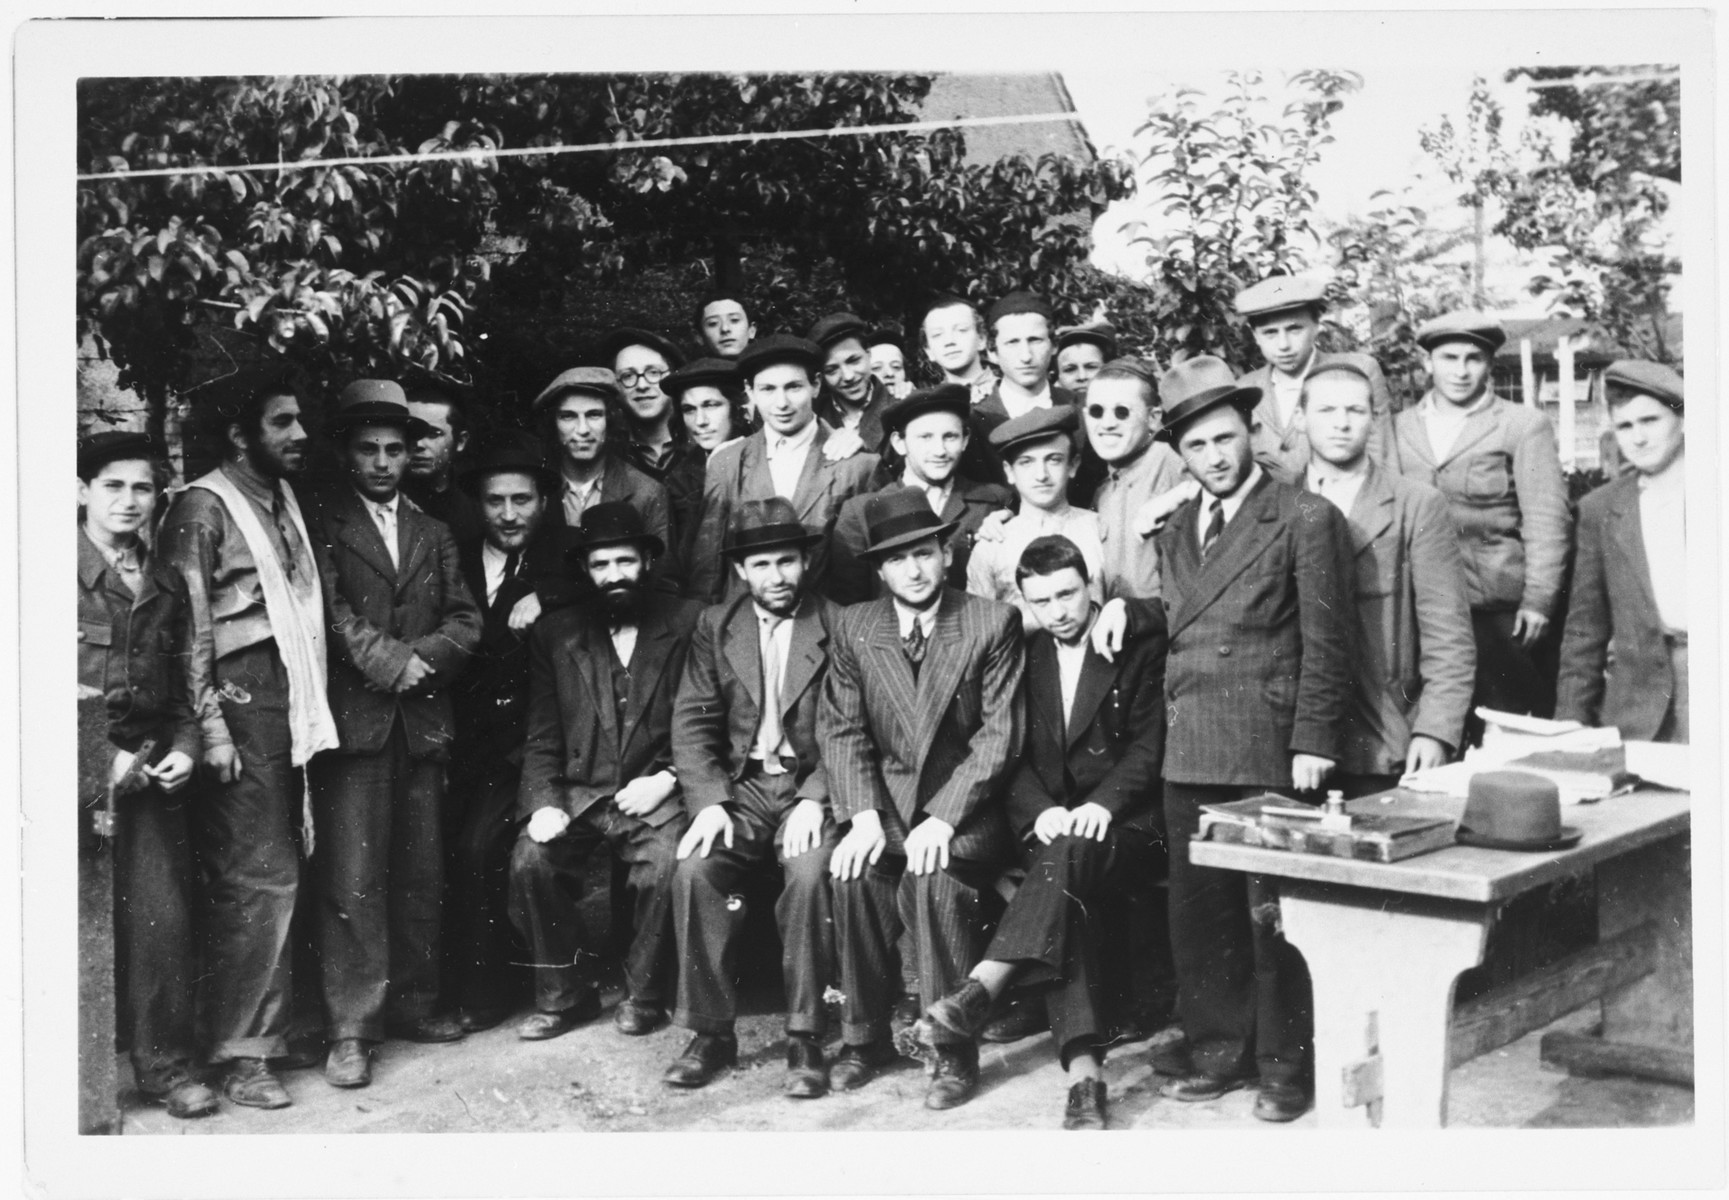 Group protrait of Orthodox men and boys [probably yeshiva students] in the Zeilsheim displaced persons' camp.